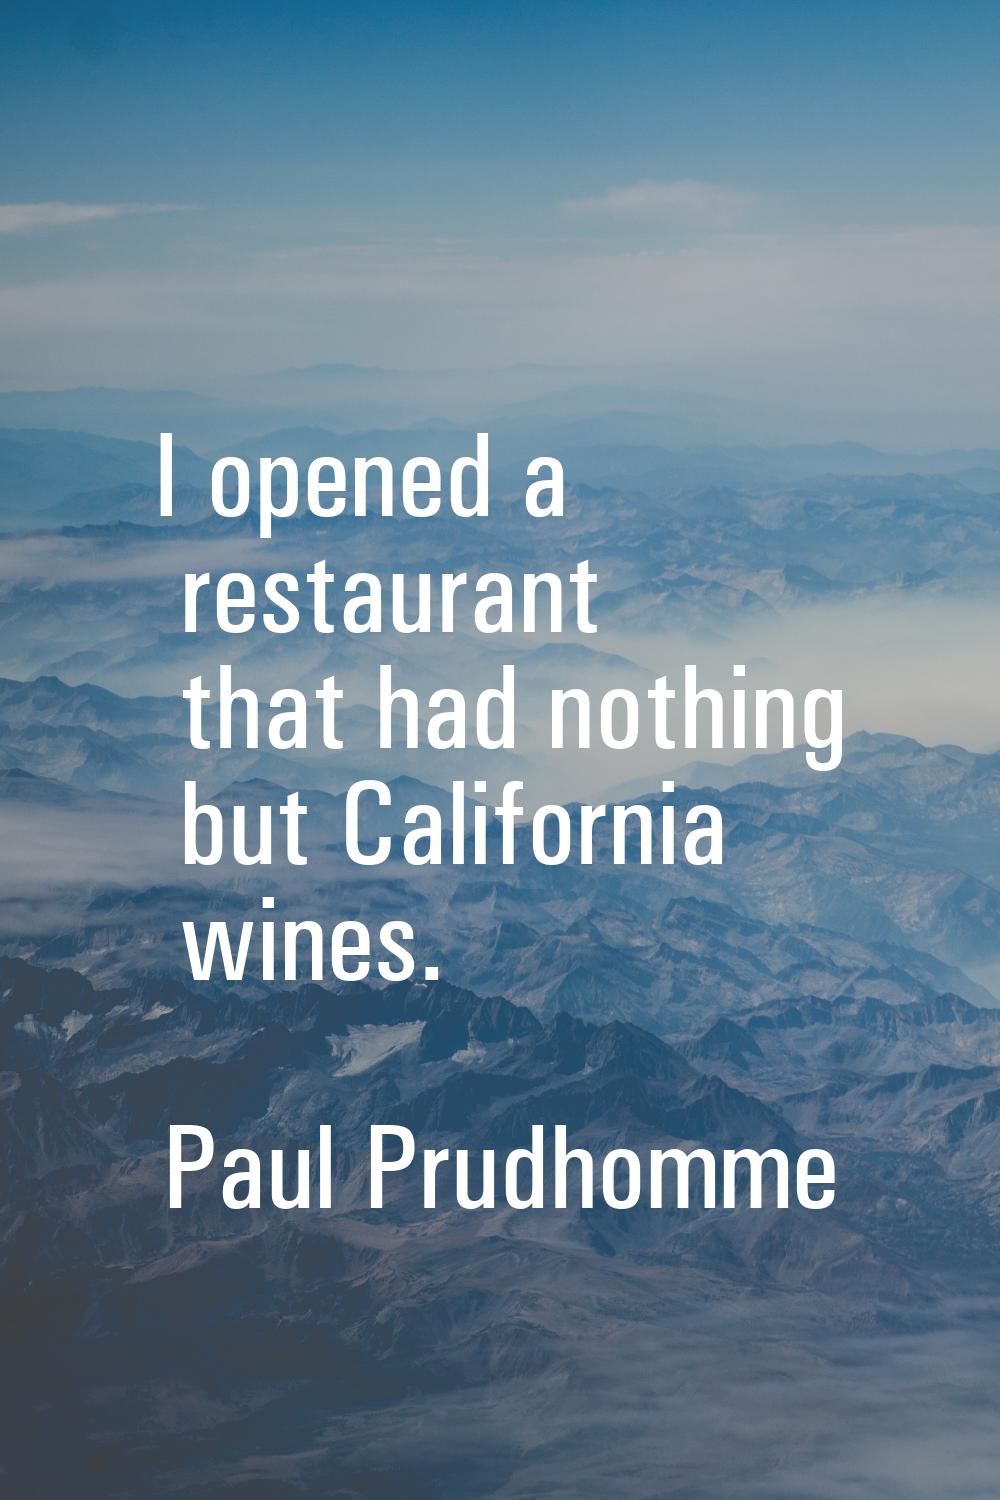 I opened a restaurant that had nothing but California wines.